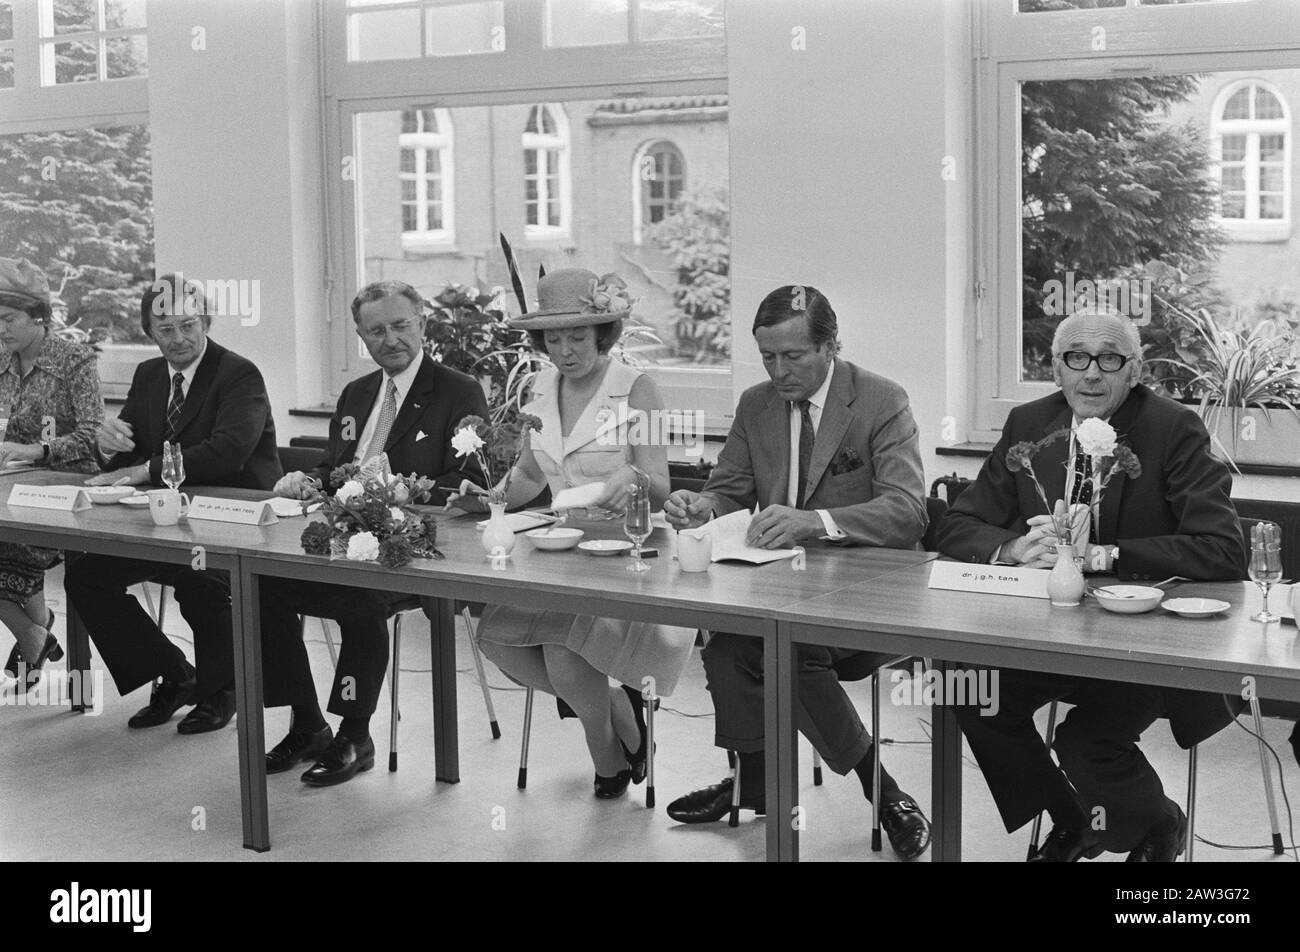 Princess Beatrix and Prince Claus putting three-day visit to Limburg; Beatrix and Claus while visiting Medical Faculty, right Dr. JGH Tans /. Date: August 21, 1974 Location: Limburg Keywords: visit, princes, princesses Person Name: Beatrix, Princess, Claus, prince Stock Photo